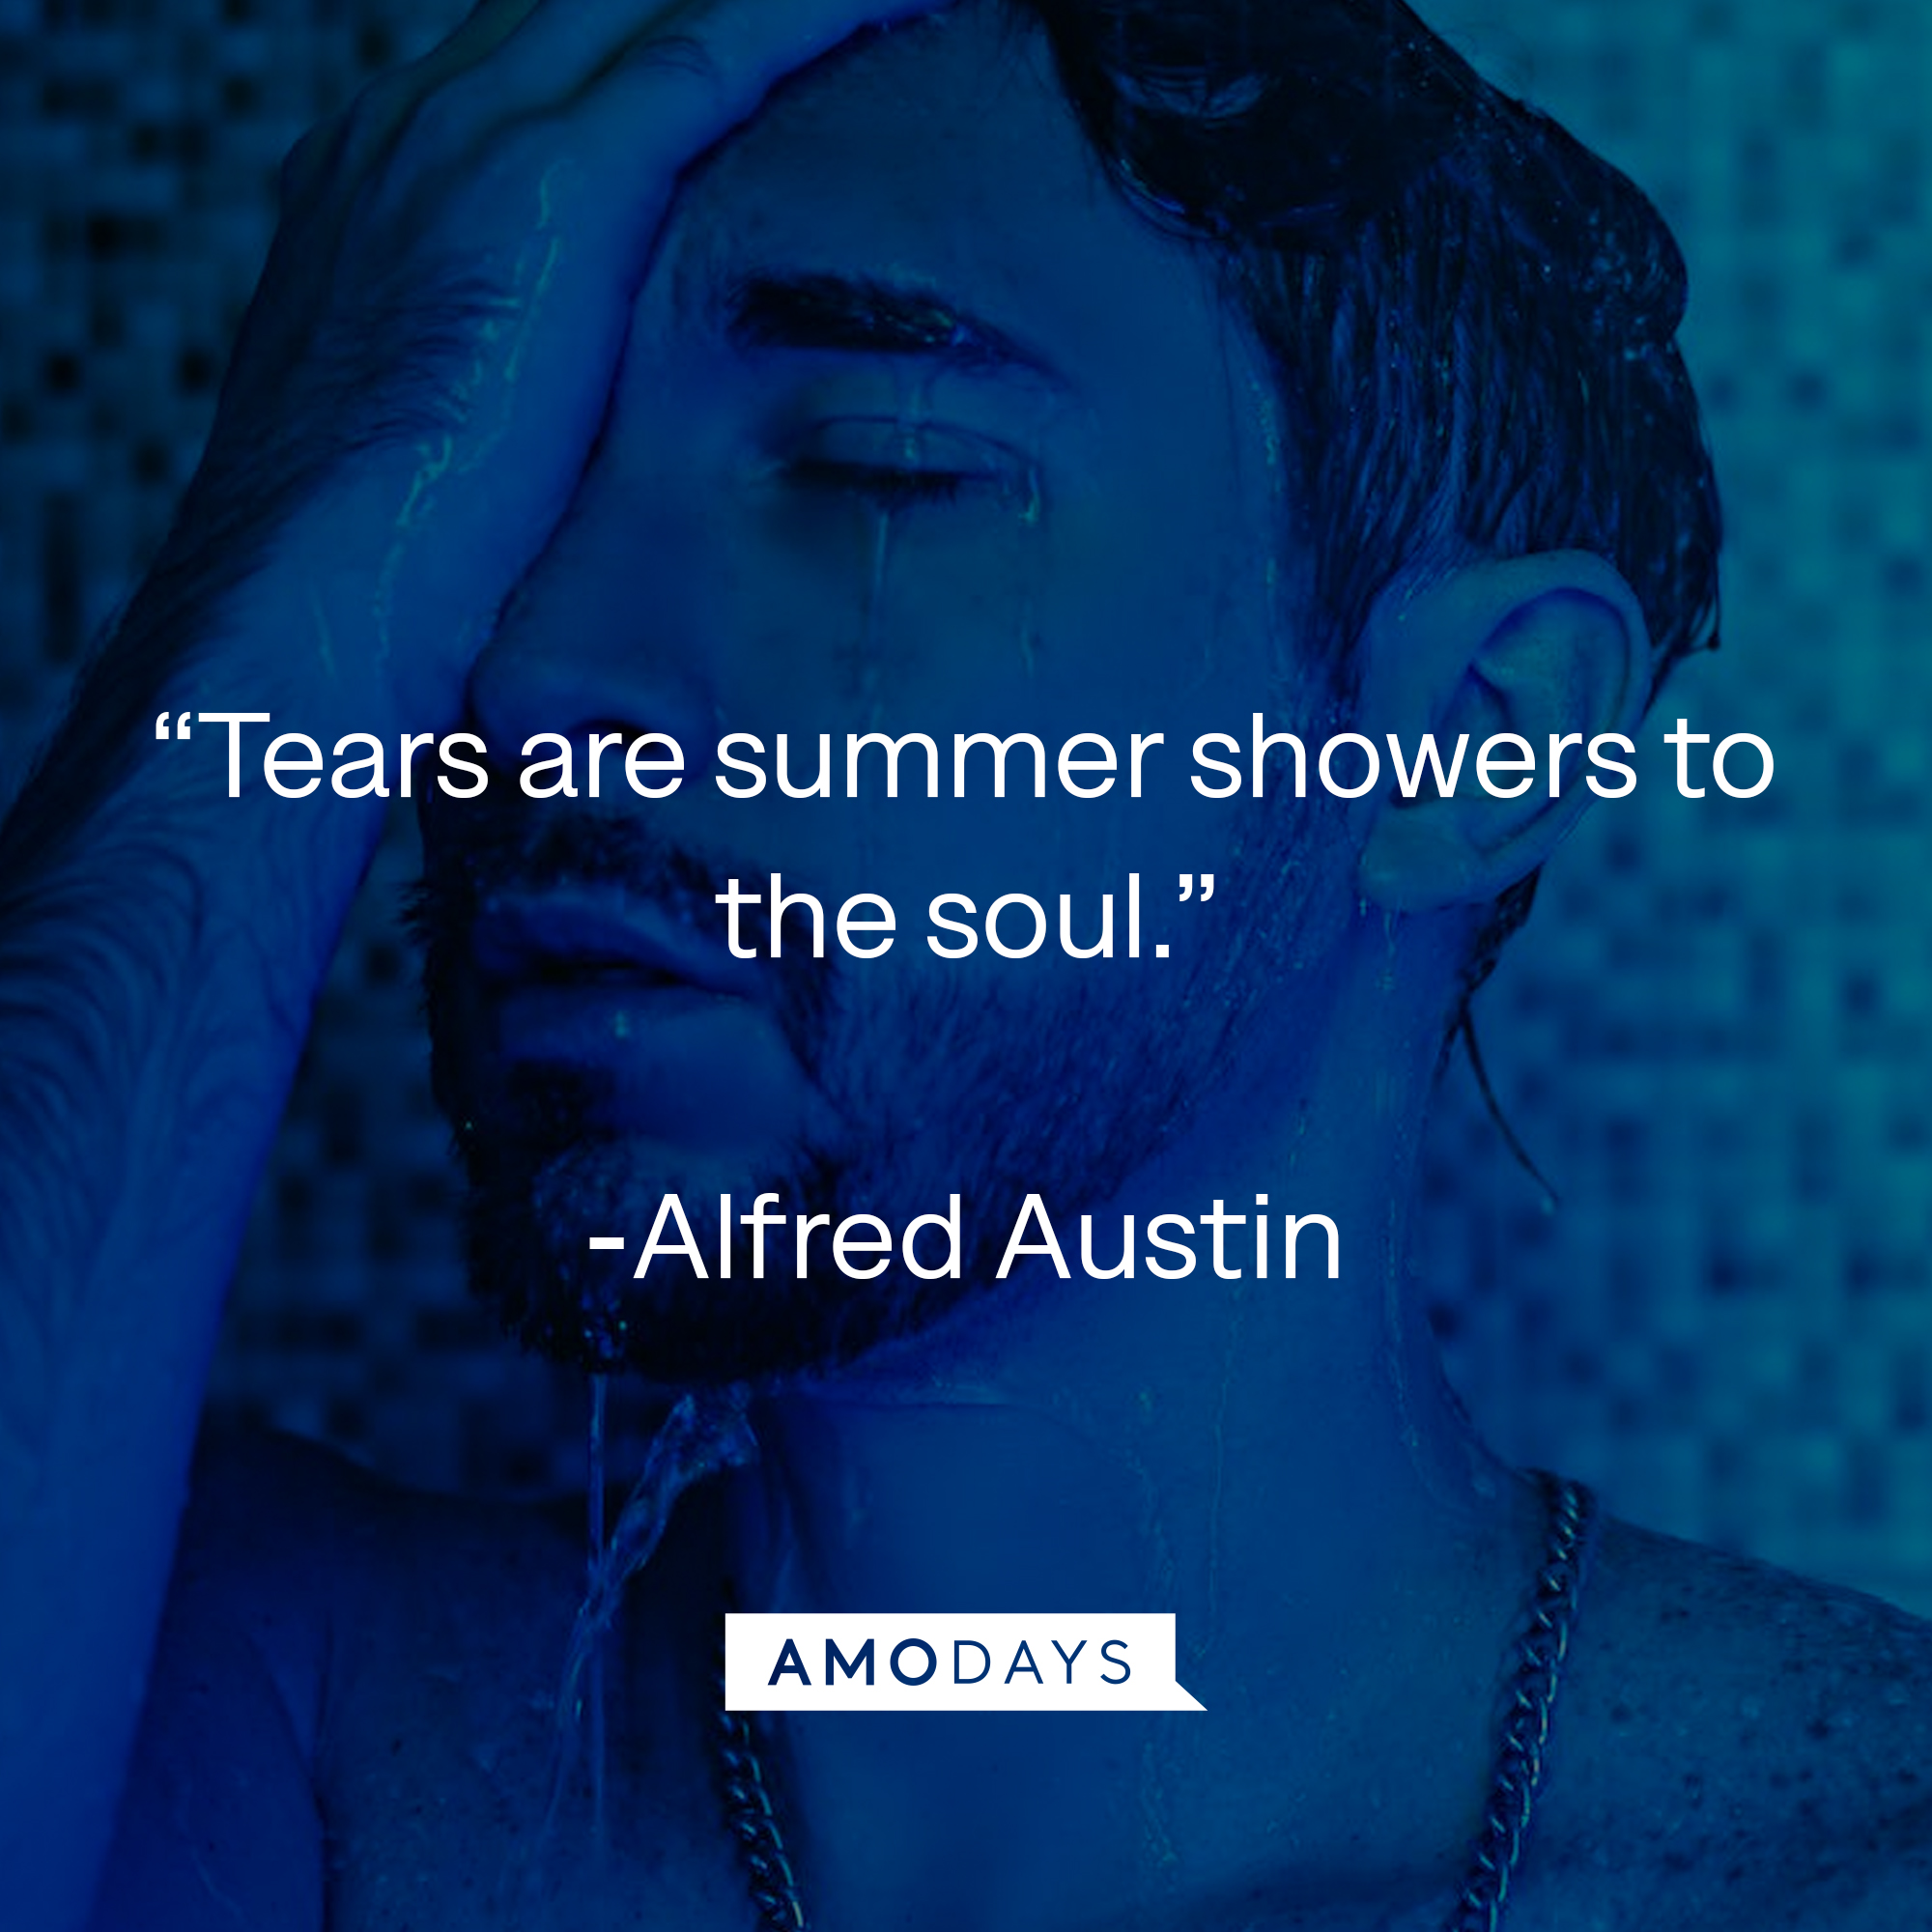 Alfred Austin's quote: "Tears are summer showers to the soul." | Source: azquotes